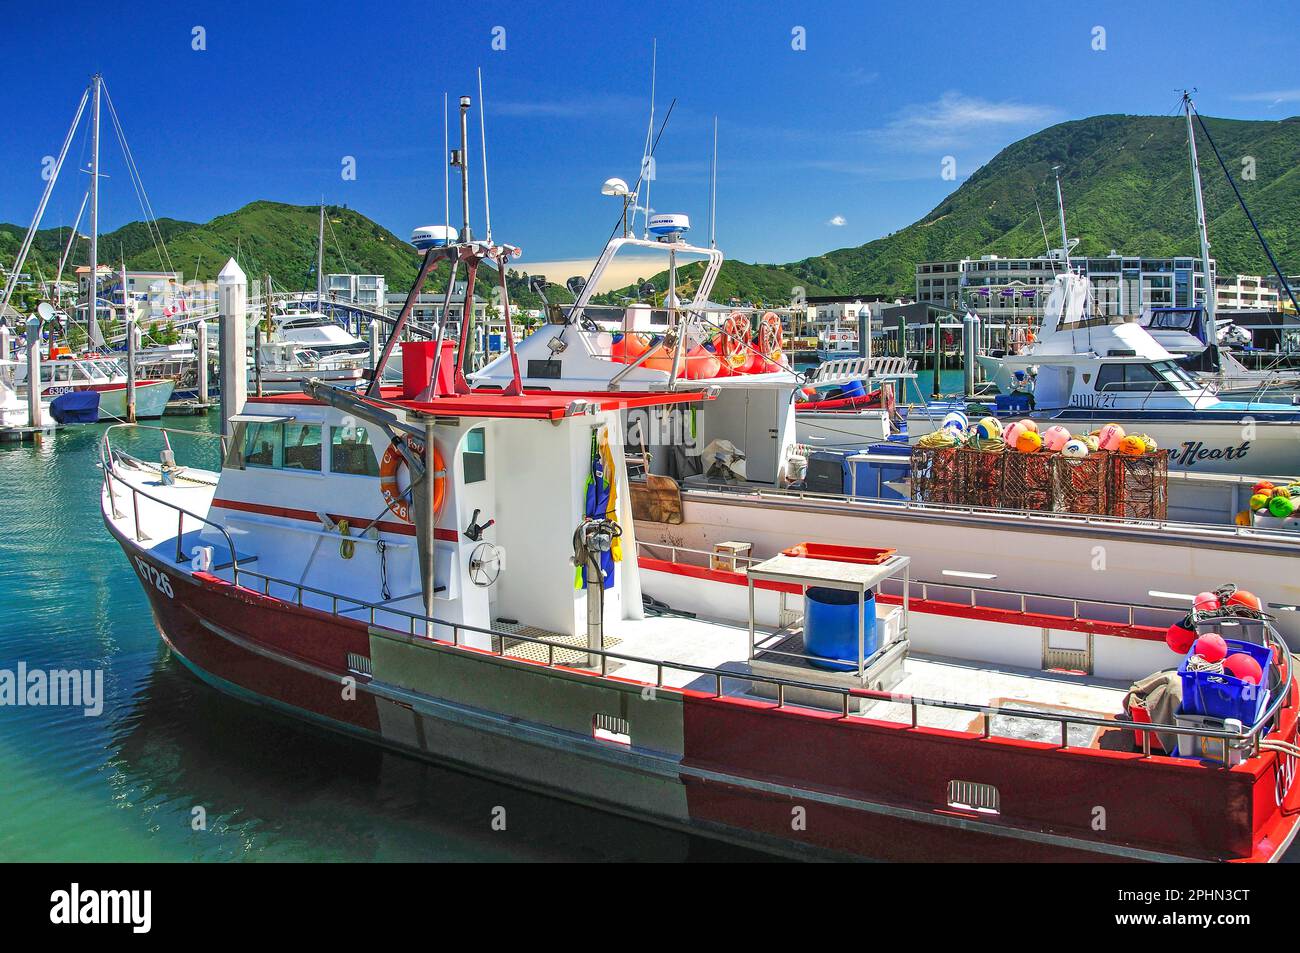 Fishing boat in harbour, Picton, Queen Charlotte Sound, Marlborough Sounds, Marlborough Region, South Island, New Zealand Stock Photo